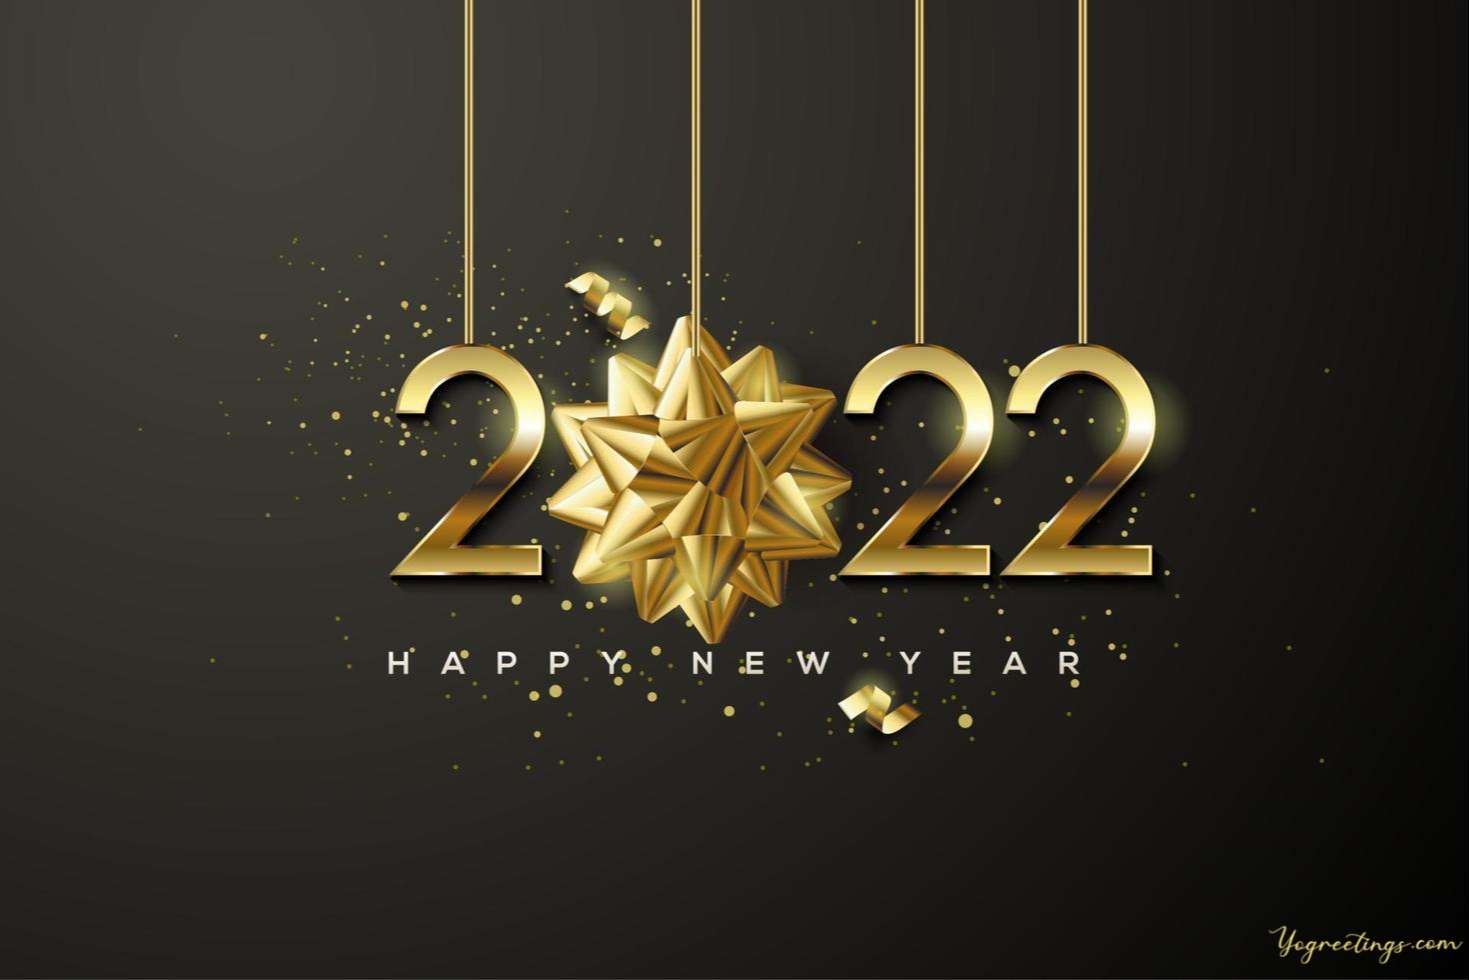 Download New Year 2022 wallpapers to your desktop for free